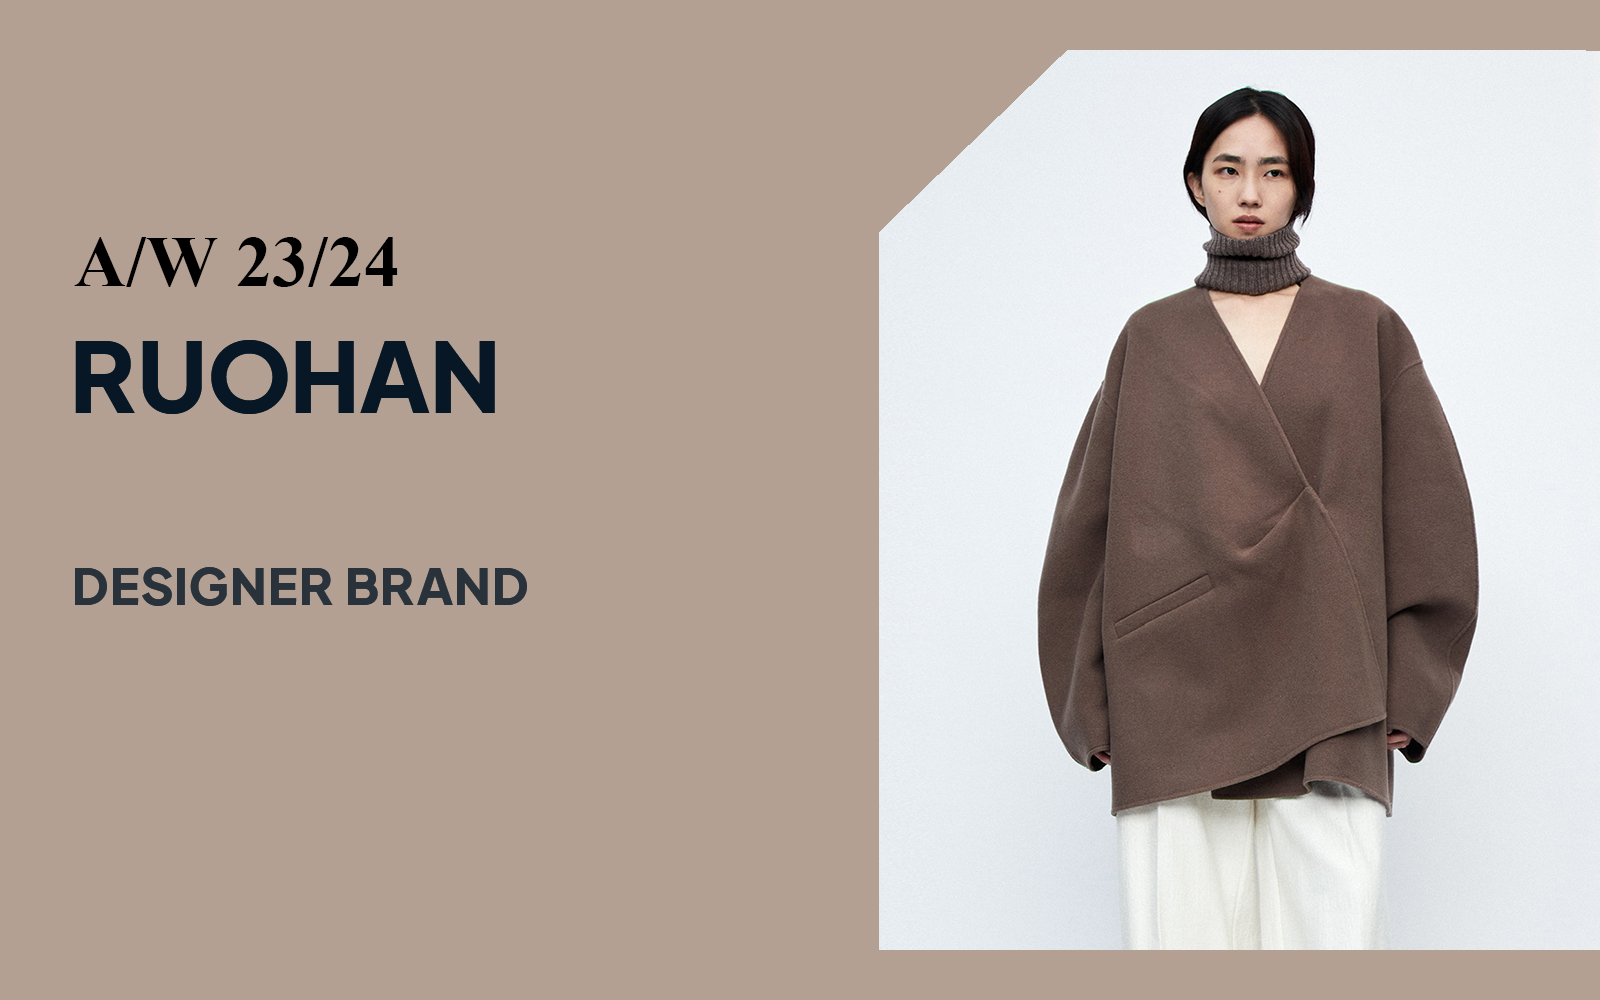 Relaxation and Minimalism -- The Analysis of RUOHAN The Womenswear Designer Brand